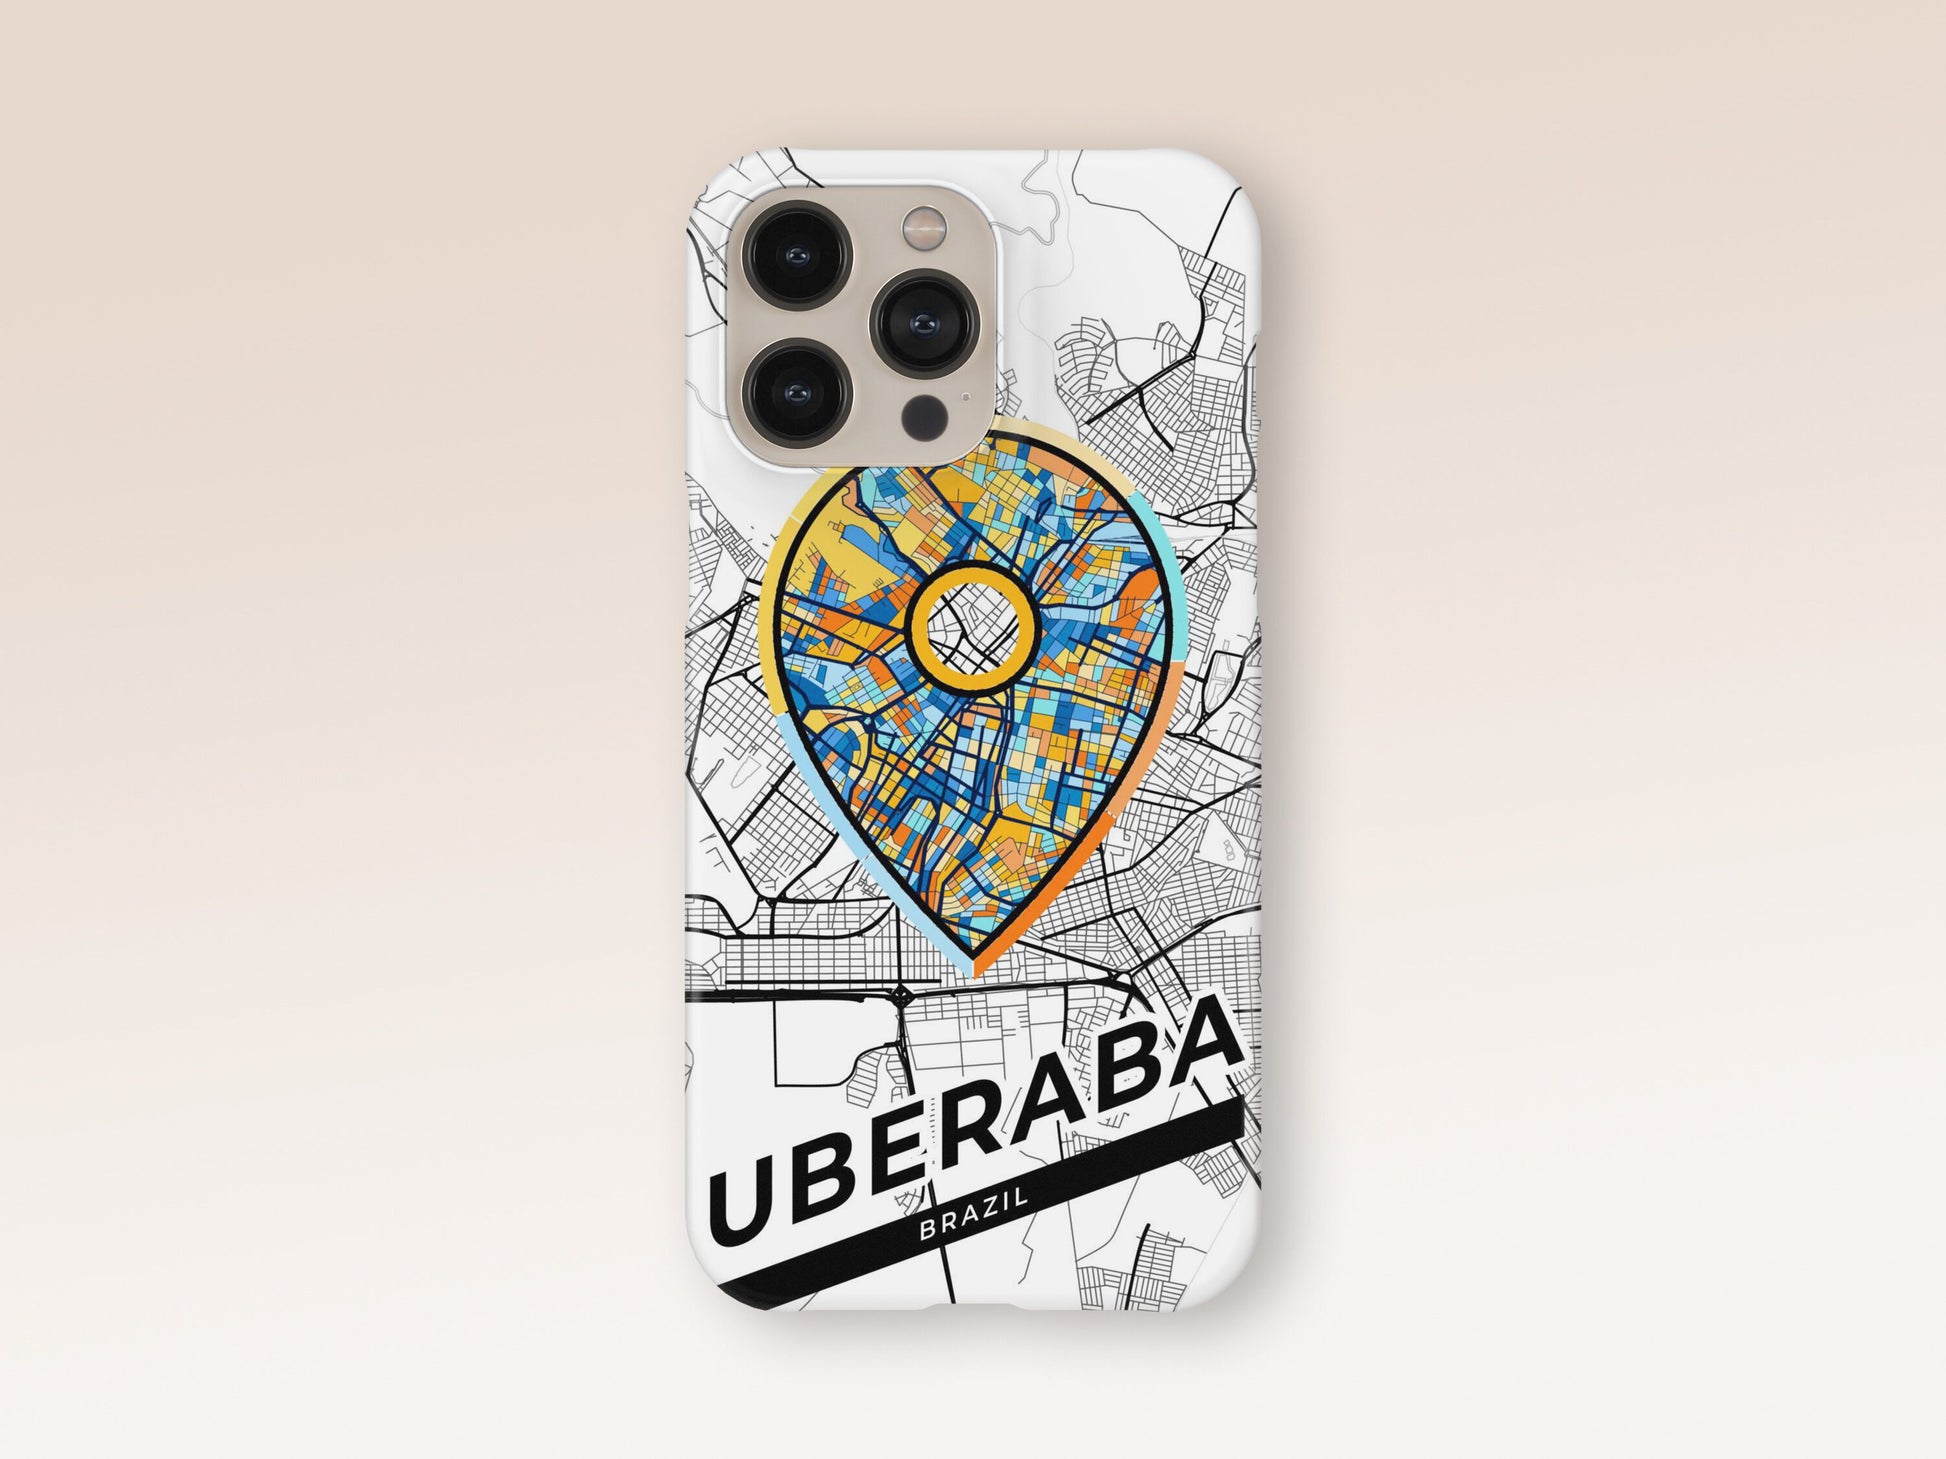 Uberaba Brazil slim phone case with colorful icon. Birthday, wedding or housewarming gift. Couple match cases. 1